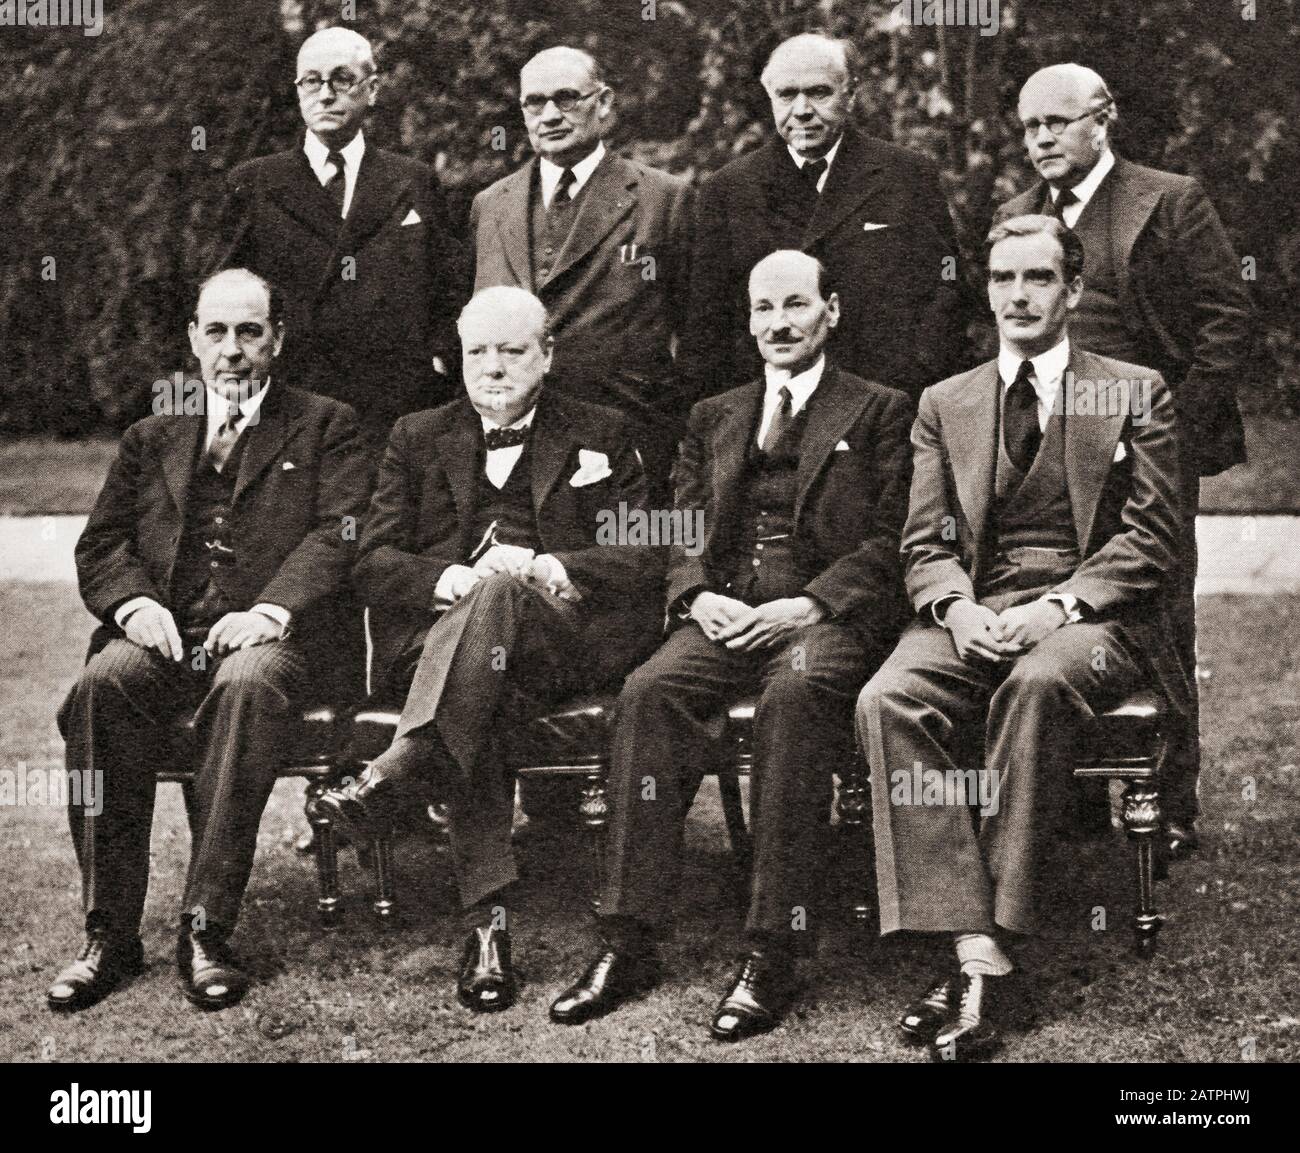 Mr. Churchill's War Cabinet in the spring of 1941. Back row, left to right, Mr. Arthur Greenwood, Minister without Portfolio, Mr. Ernest Bevin, Minister of Labour, Lord Beaverbrook, Minister of Aircraft Production, Sir Kingsley Wood, Chancellor of the Exchequer. Front row, left to right, Sir John Anderson, Lord President of the Council, Mr. Winston Churchill, Prime Minister, Mr. Clement Attlee, Lord Privy Seal, Mr. Anthony Eden, Foreign Secretary. Sir Winston Leonard Spencer-Churchill, 1874 –1965. British politician, statesman, army officer, and writer,  and Prime Minister Stock Photo